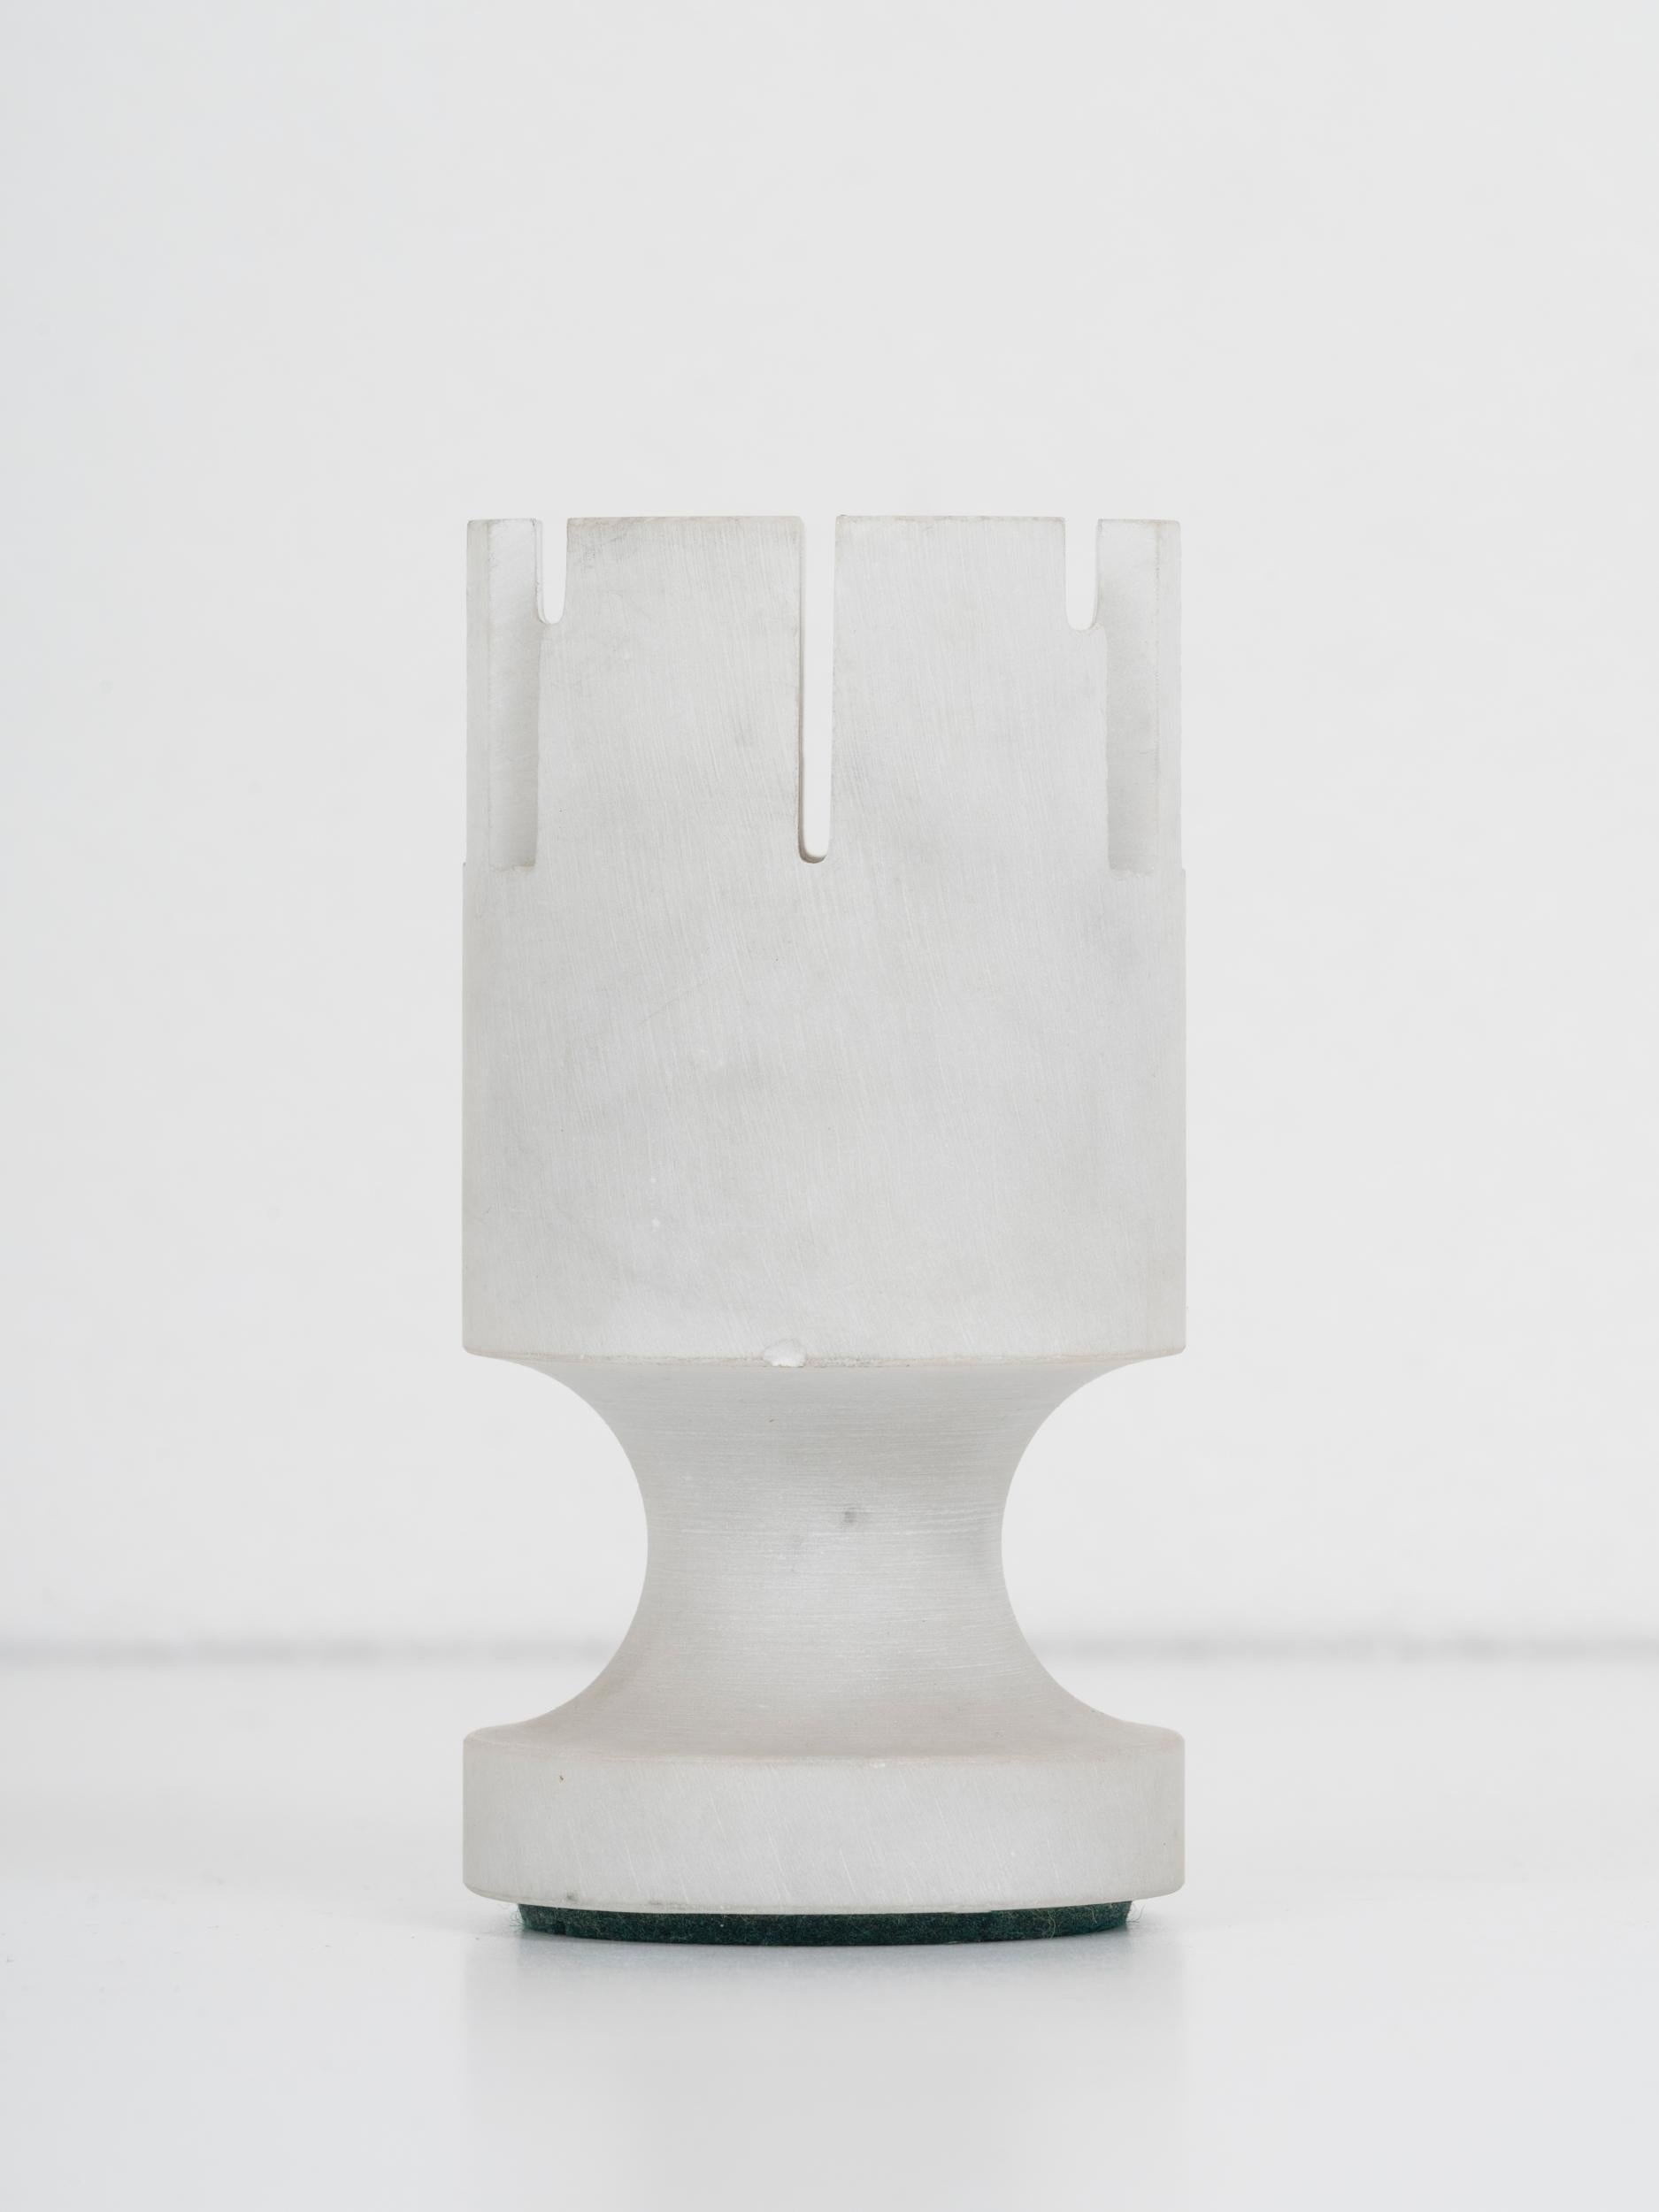 Iconic and rare letter holder by the Italian design master Enzo Mari, in white marble, designed in 1960 and produced for a short period by Danese.